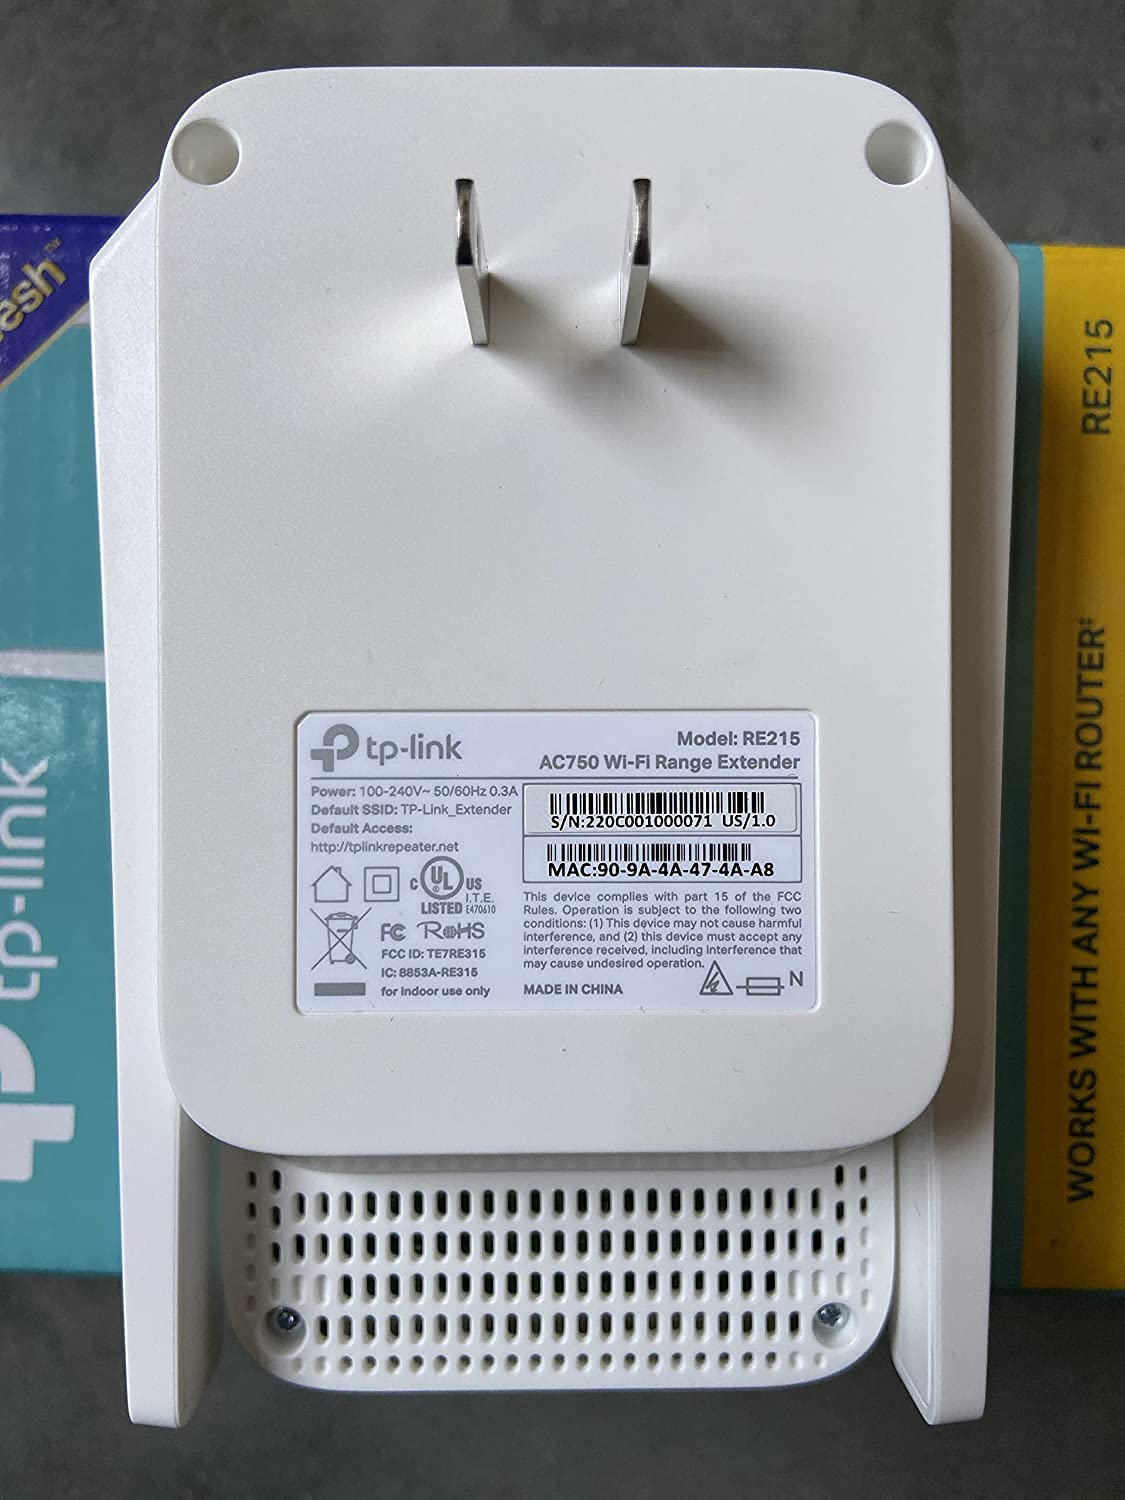 Buy TP-Link AC750 WiFi Range Extender, Up to 750Mbps, Dual Band